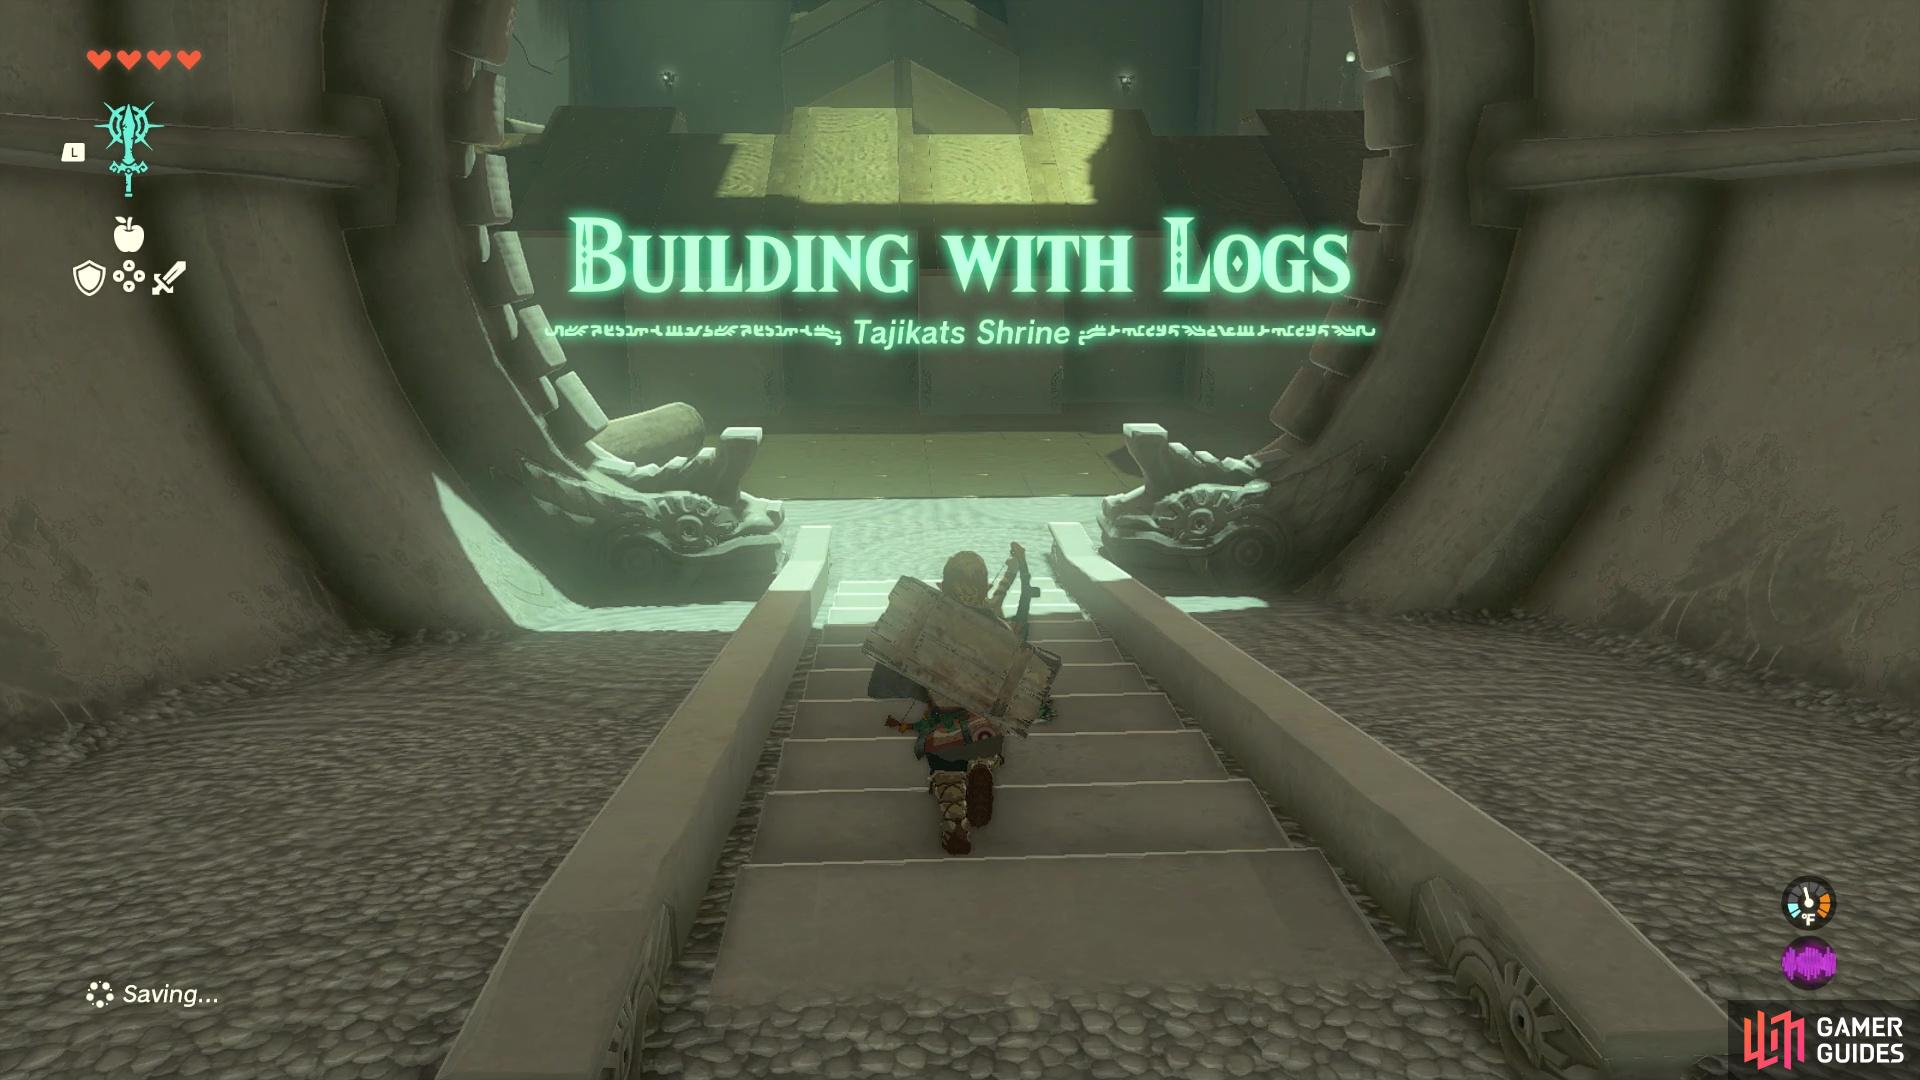 Tajikats Shrine is all about building with logs